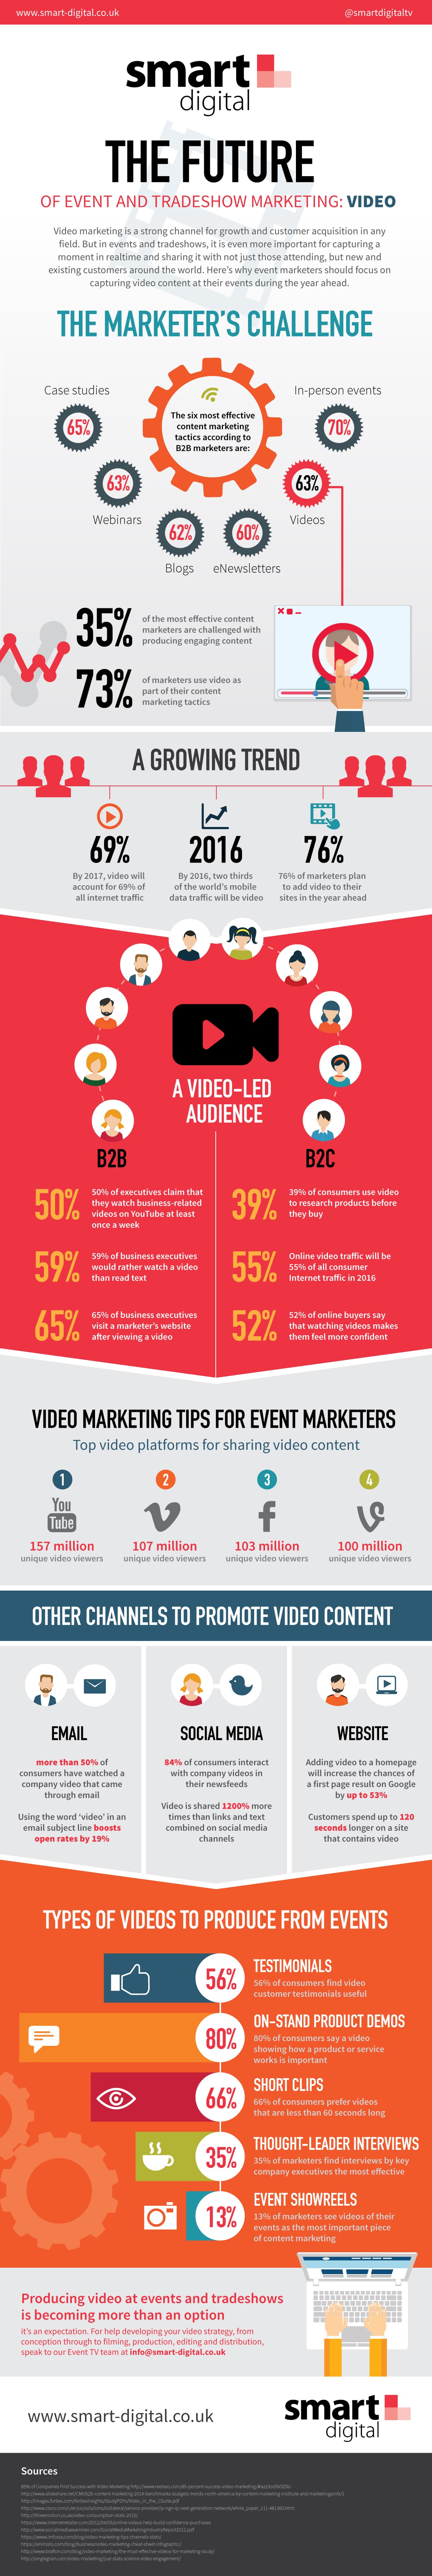 video-for-events-infographic